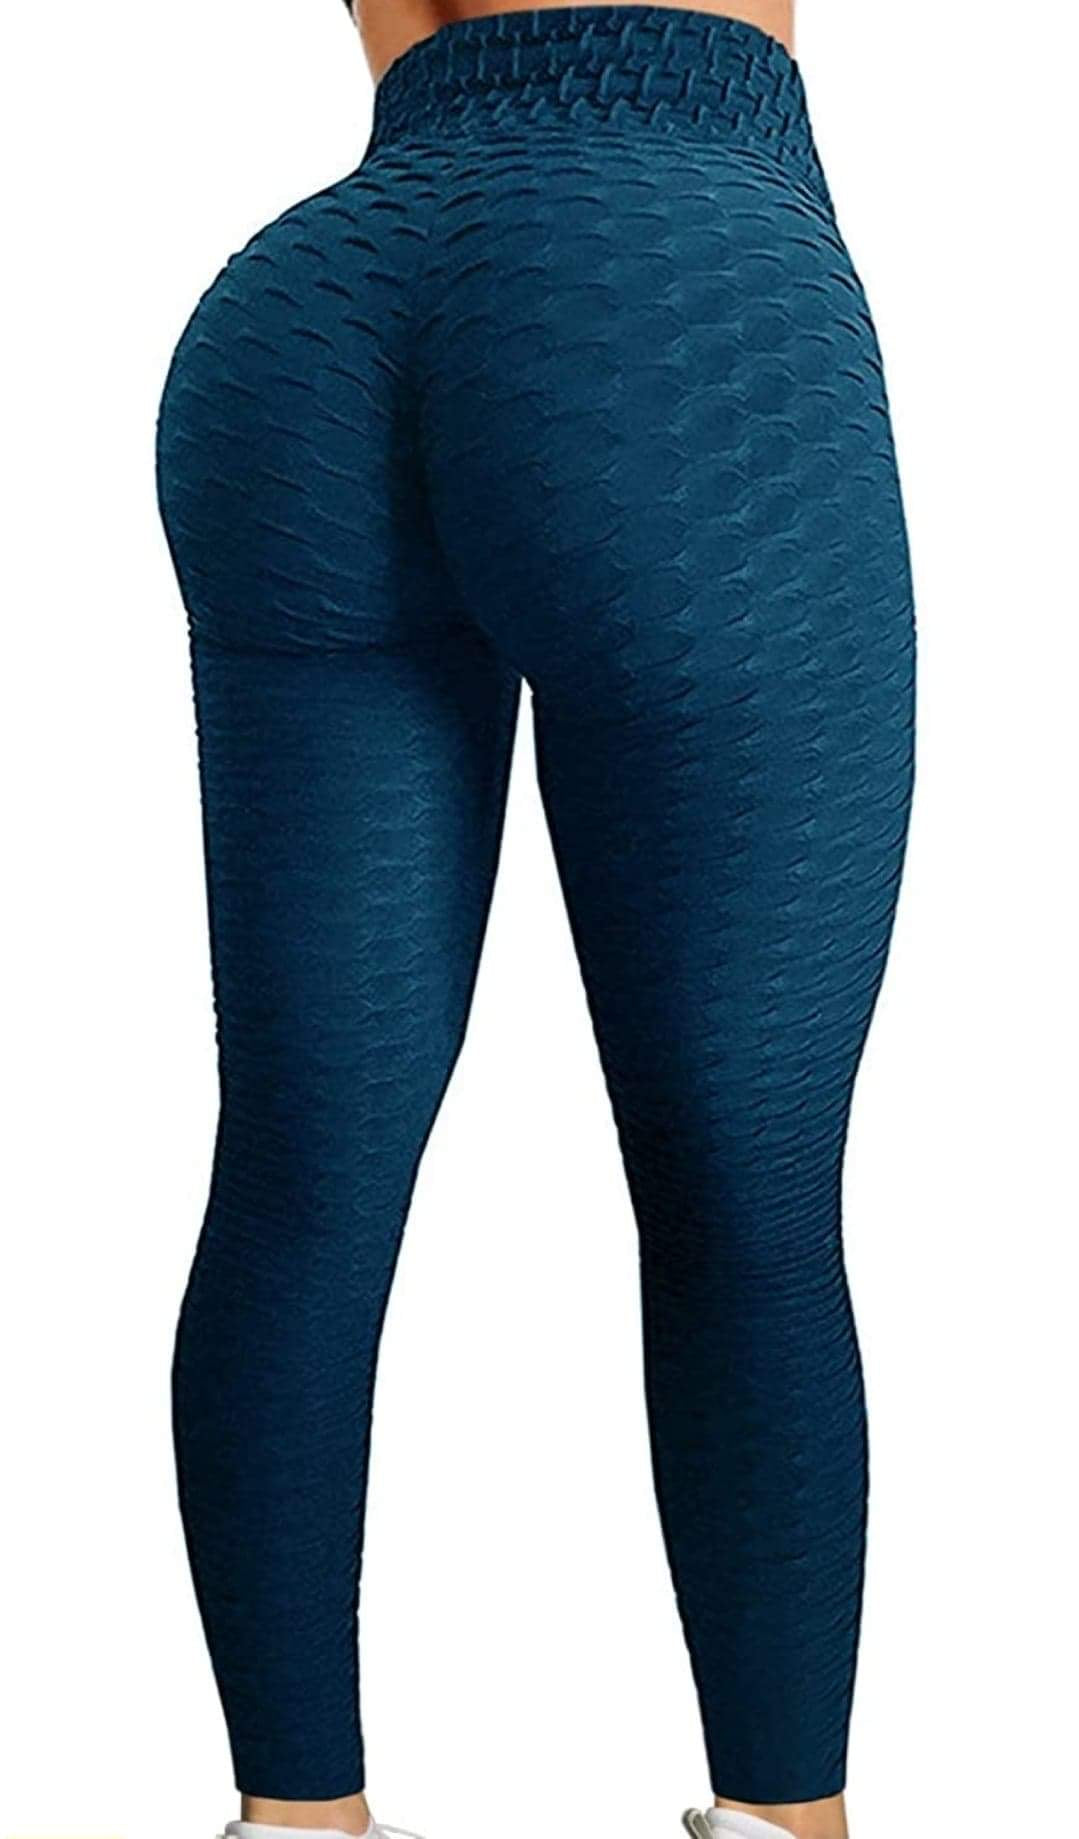 Textured High Waisted Anti-Cellulite Yoga Pants